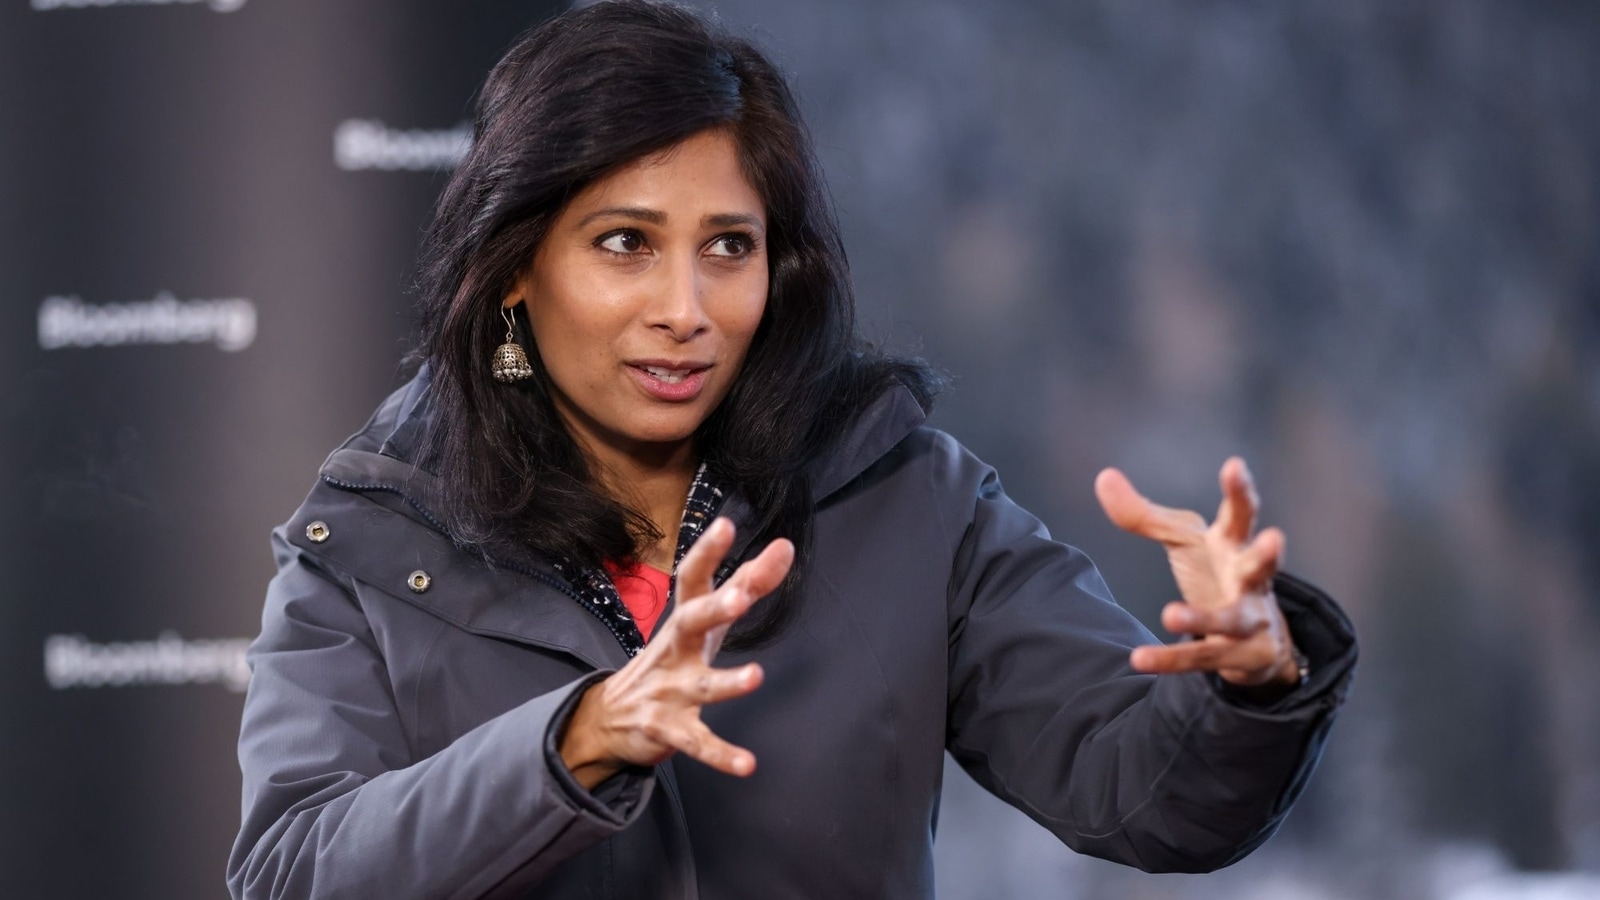 Gita Gopinath's message on world economy from Davos: ‘Tough year ahead, but...’